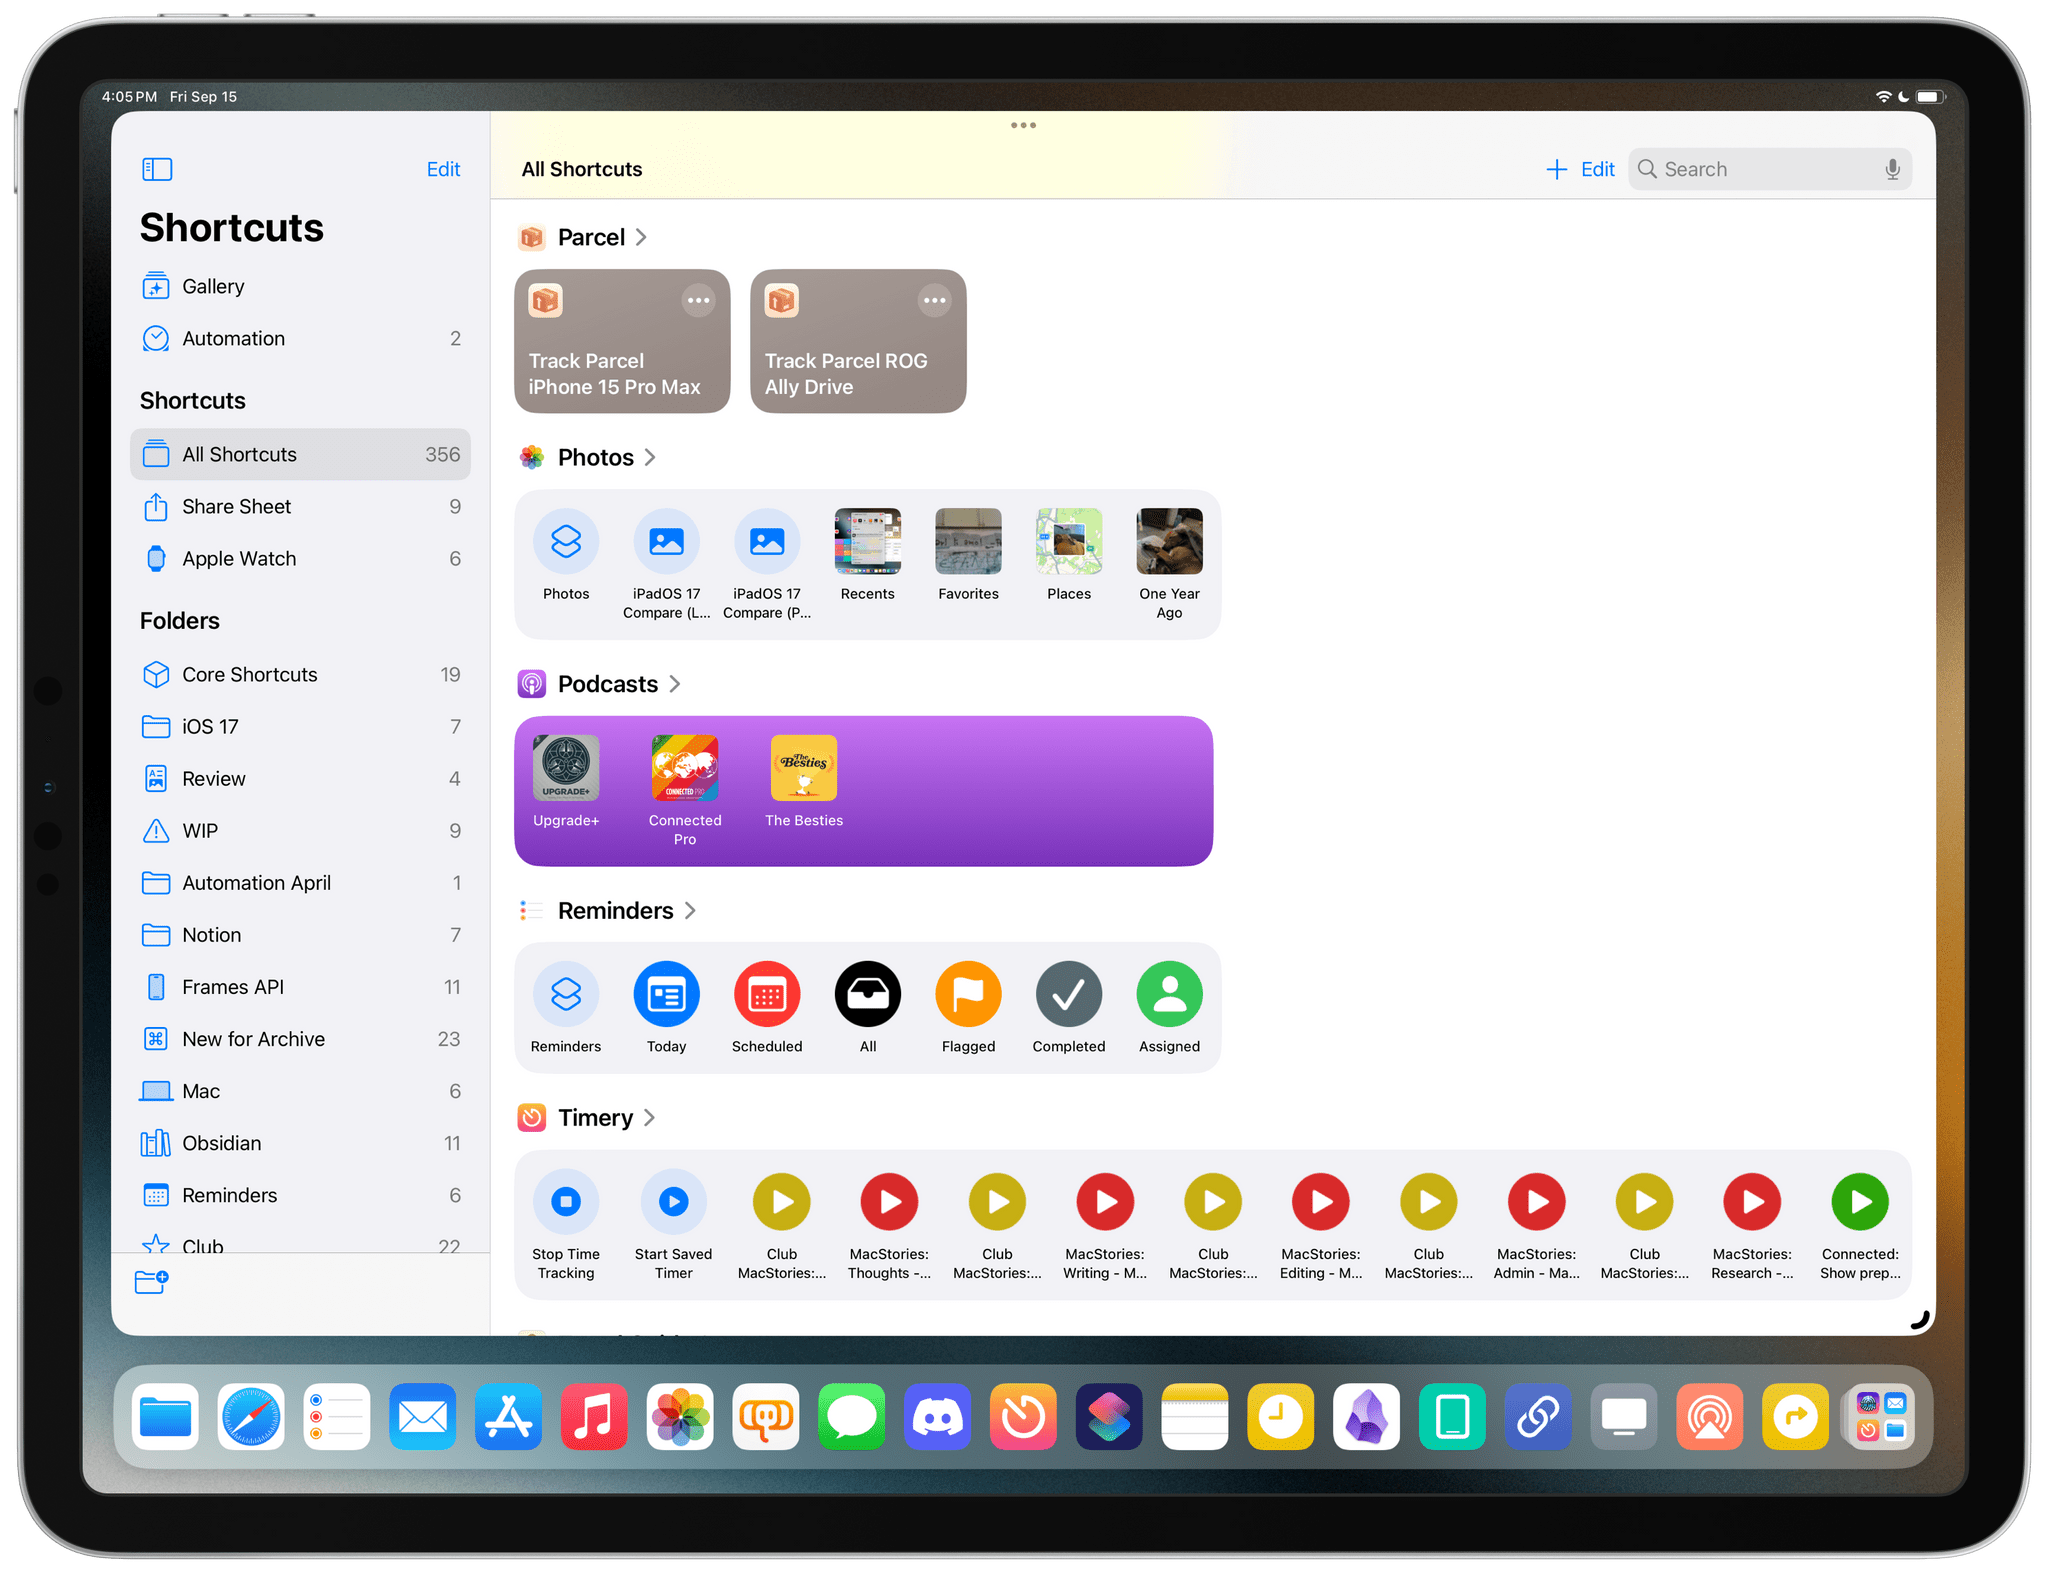 The updated App Shortcuts (with custom tiles for some apps) as seen in the Shortcuts app.